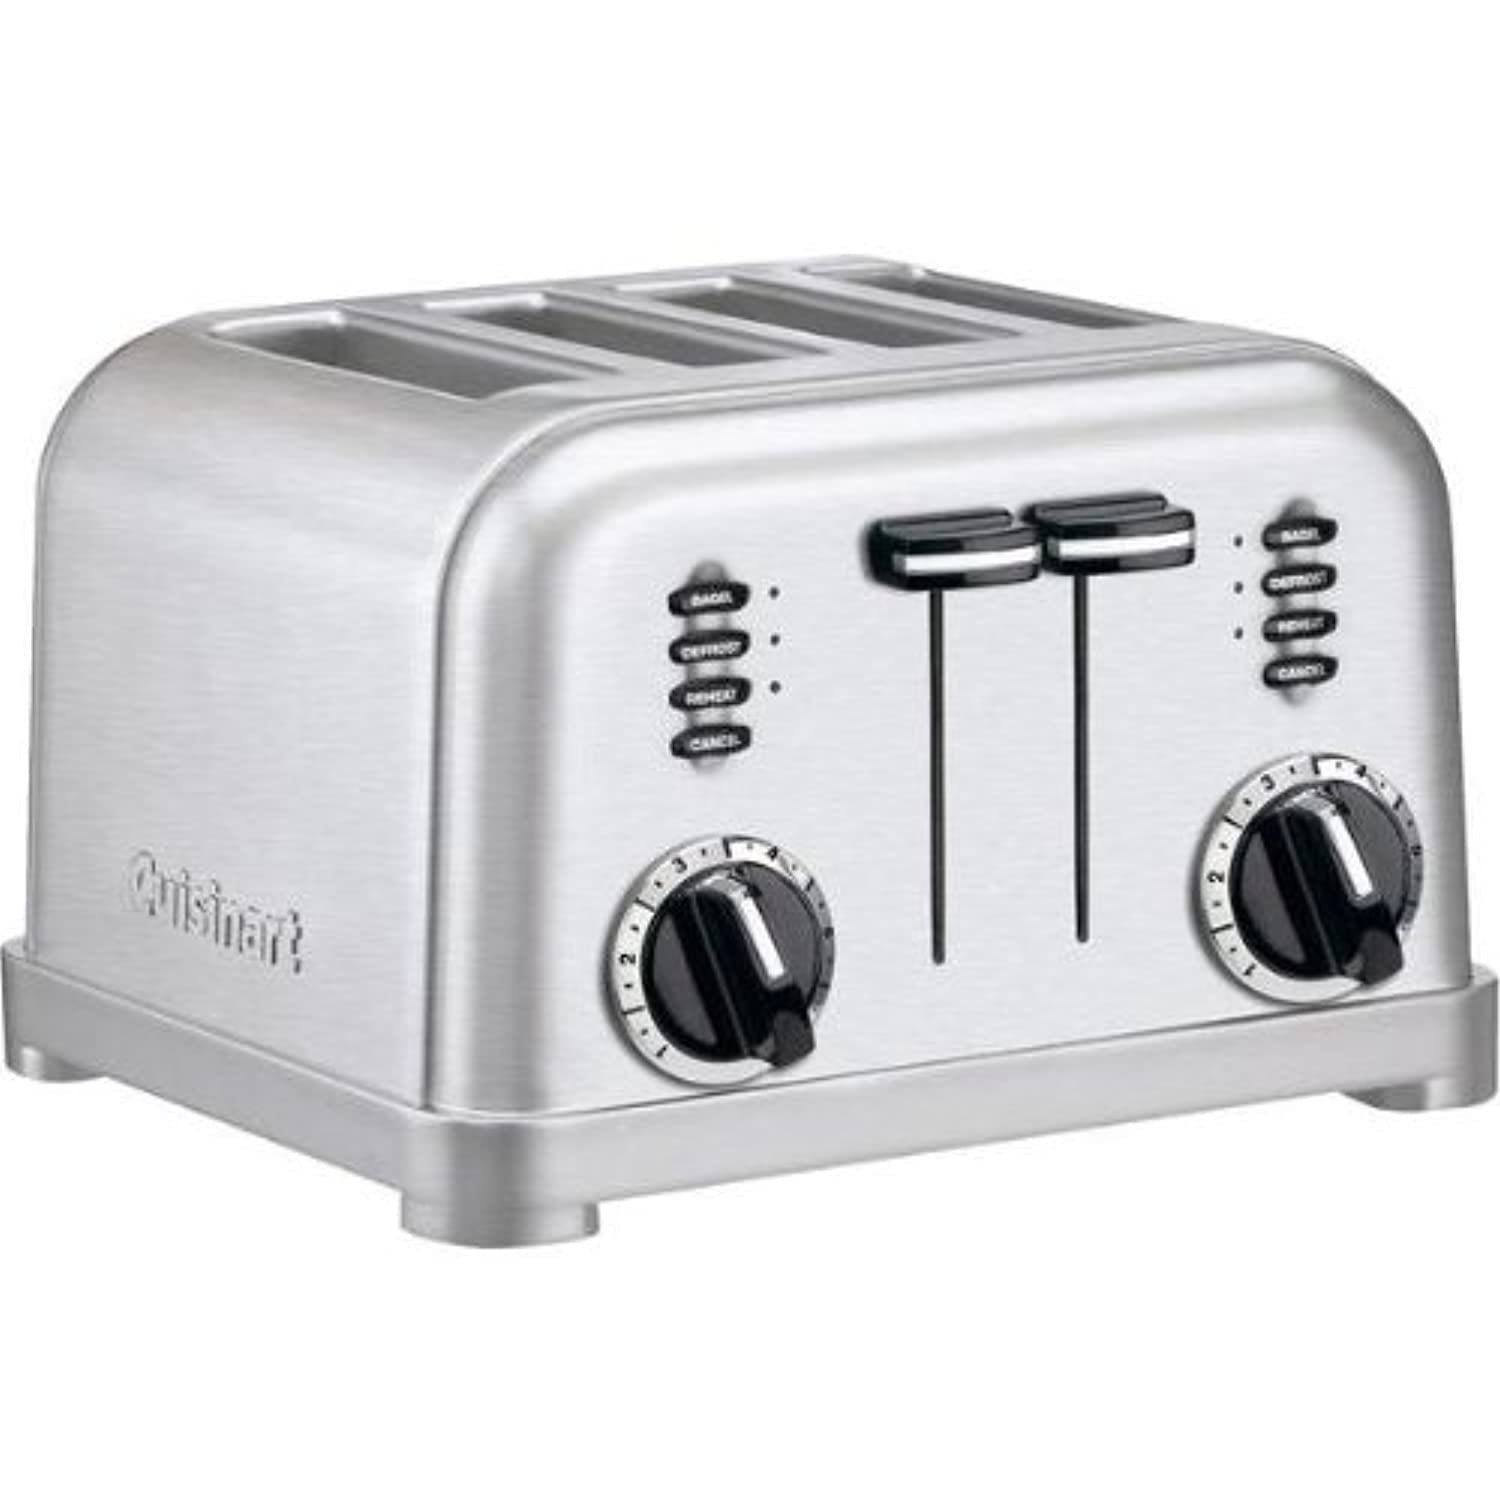 Cuisinart CPT-180 Metal Classic 4-Slice Toaster Brushed Stainless 